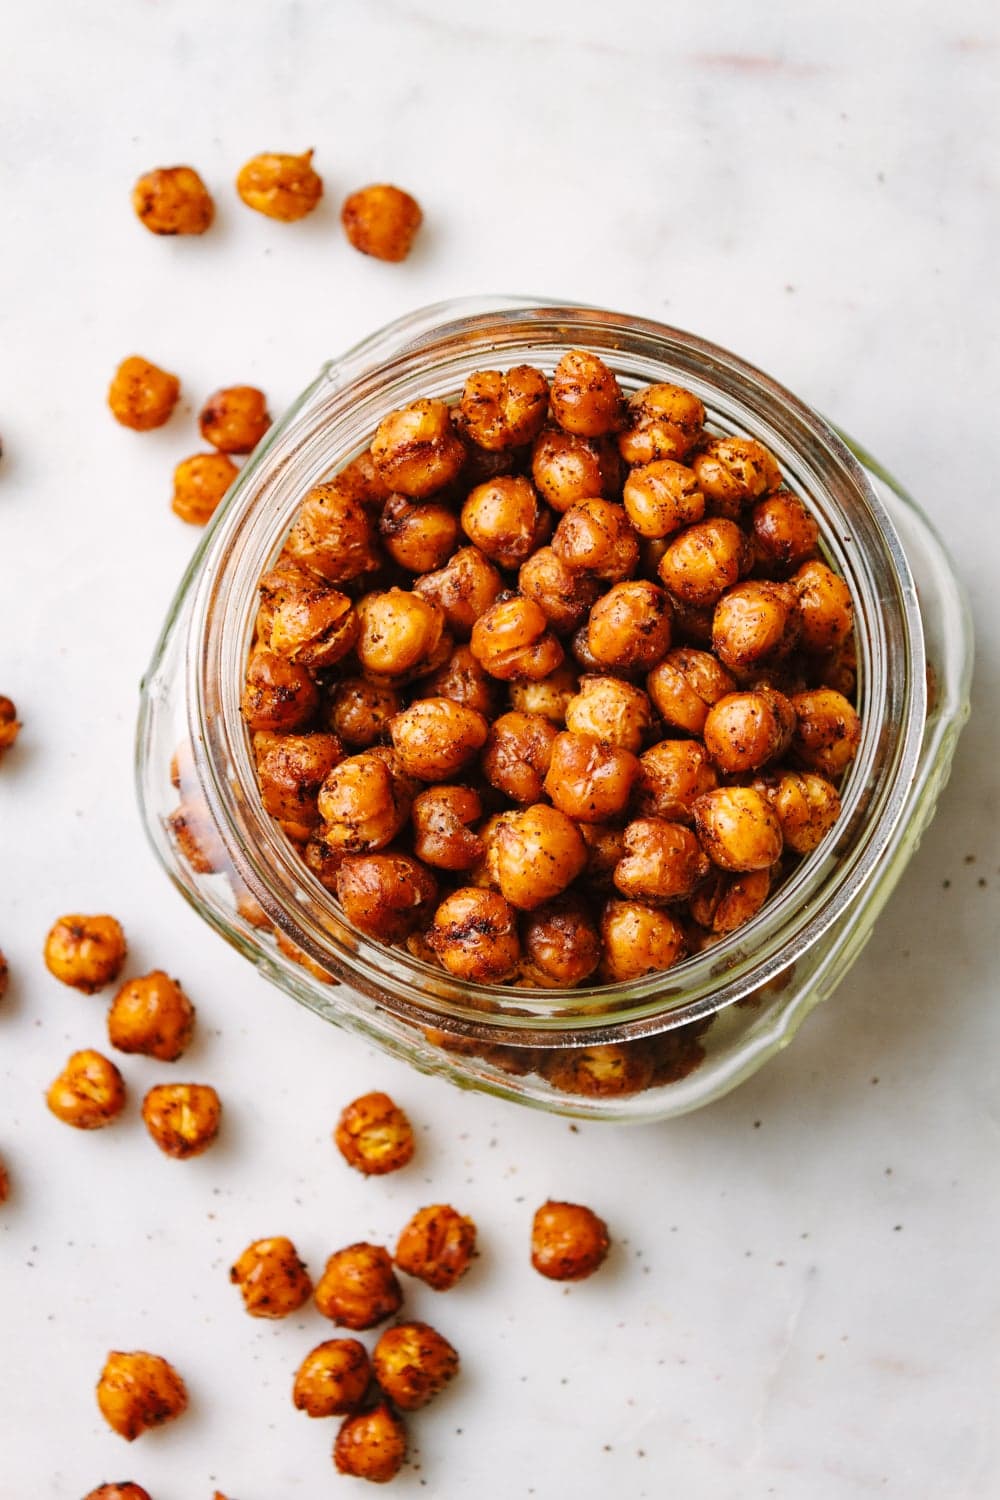 CHIPOTLE ROASTED CHICKPEAS